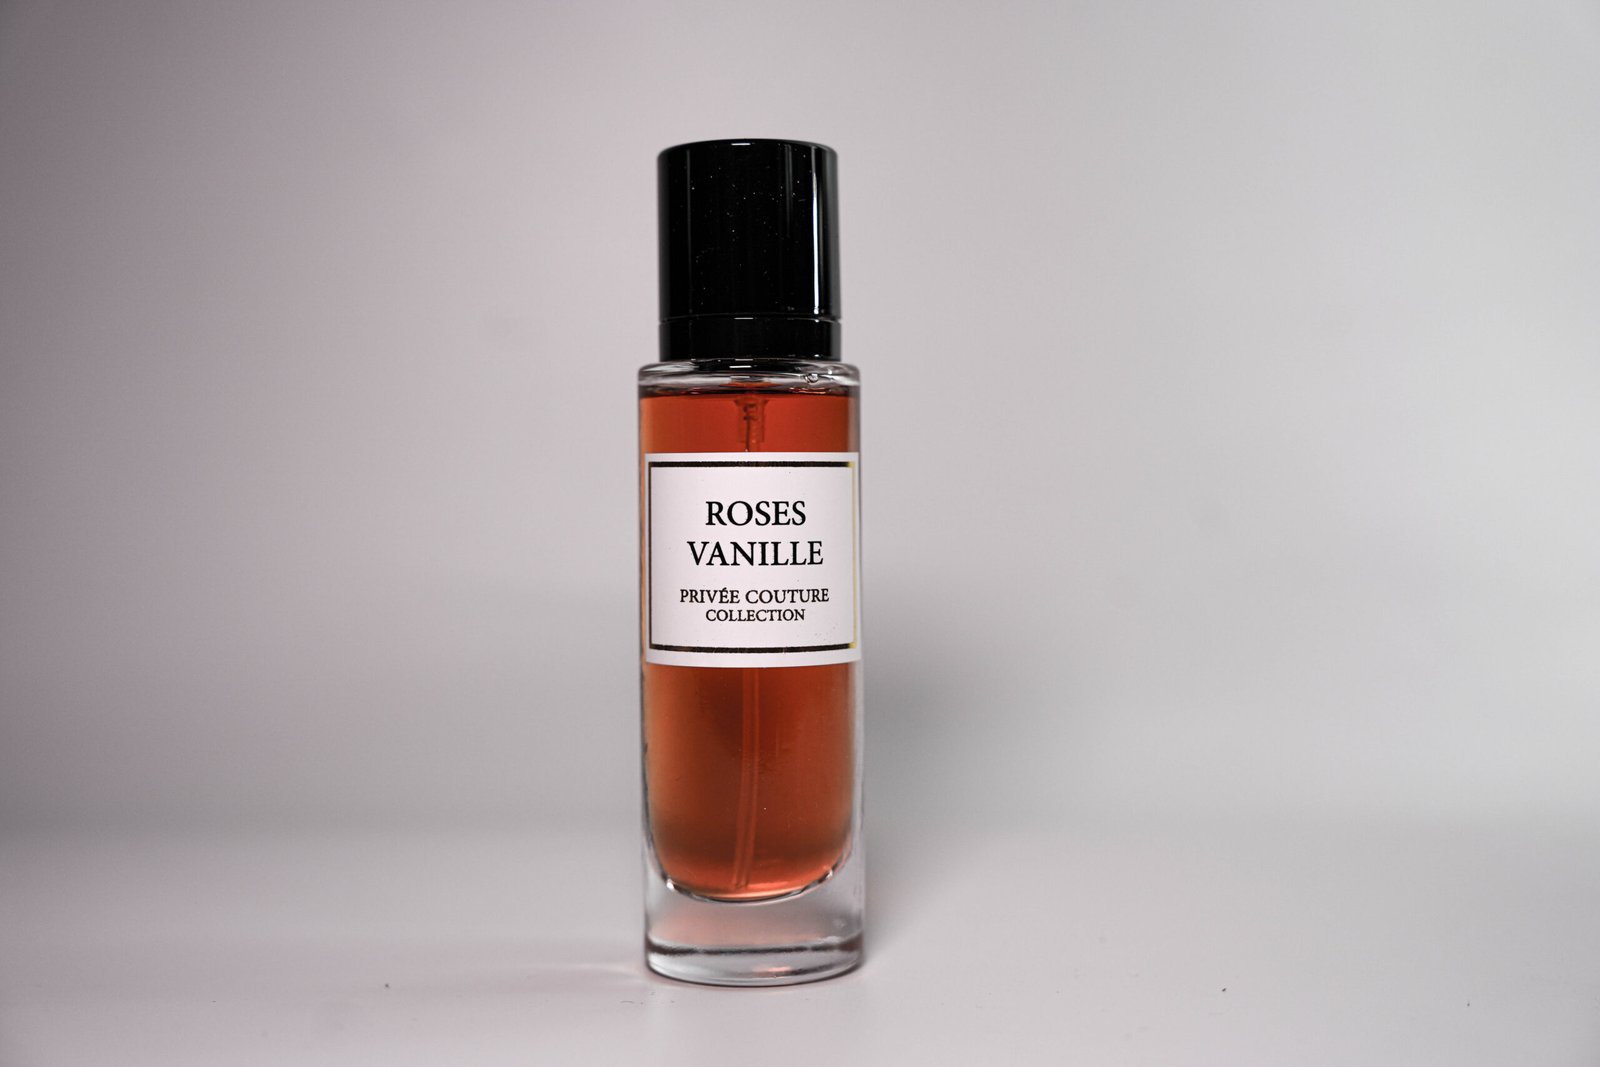 Roses Vanille Privée Couture Collection EdP 